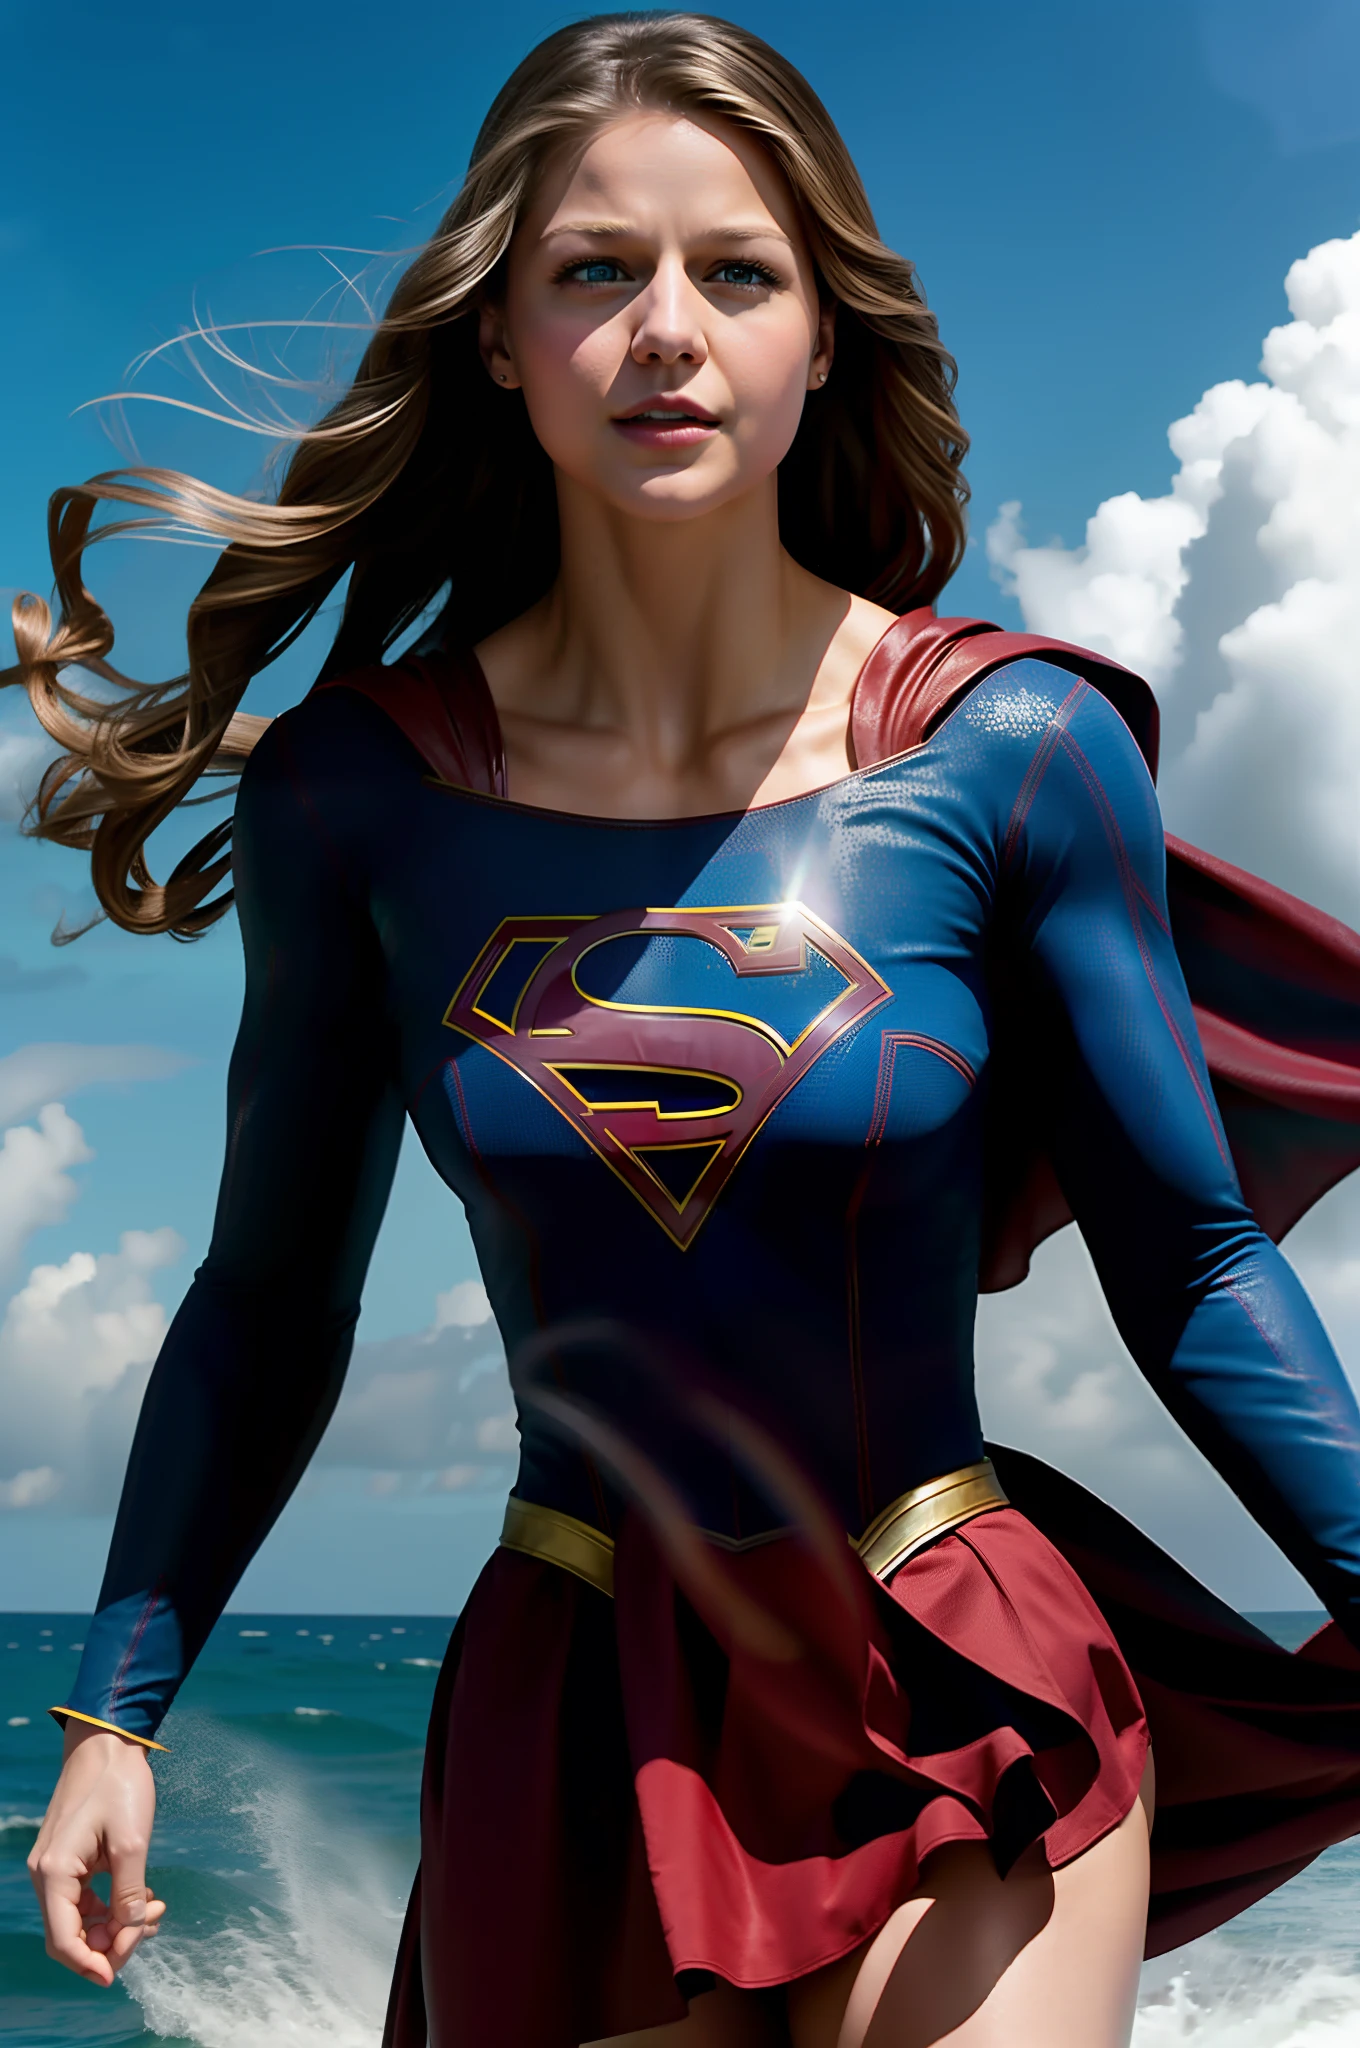 Melissa Benoist as Supergirl with an athletic physique in a tropical storm, flying over the sea